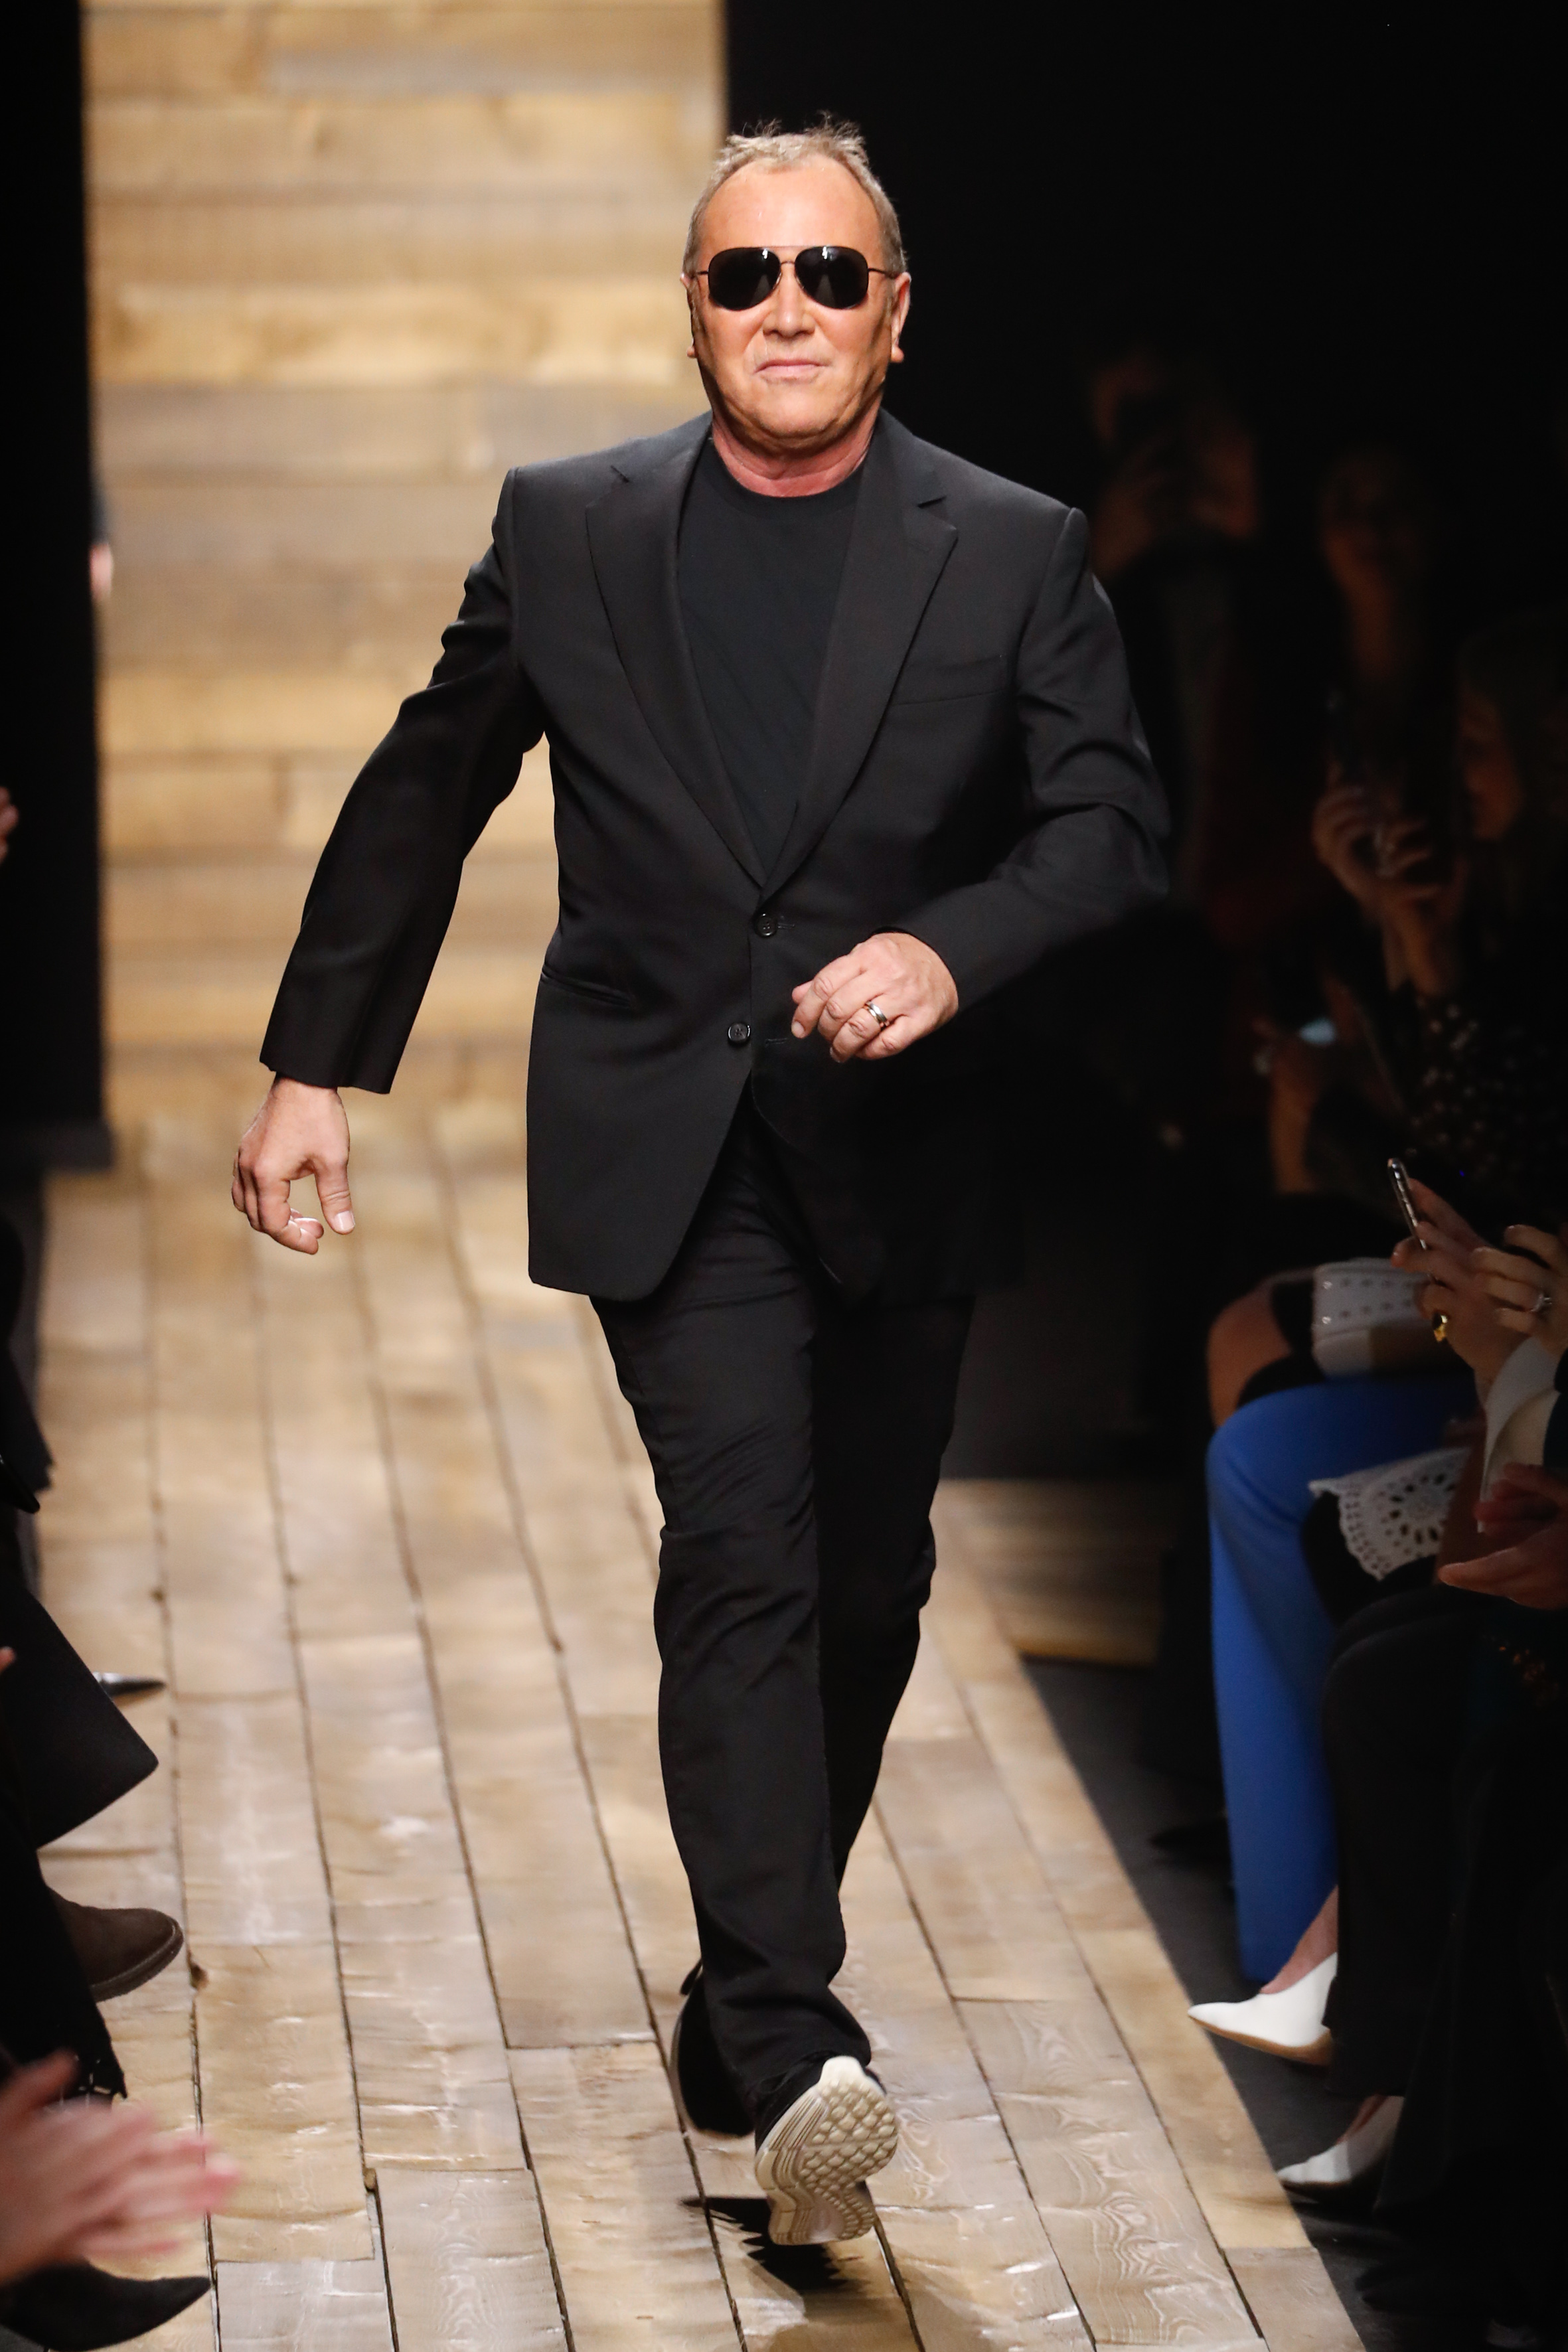 Michael Kors during the Michael Kors FW 2020 fashion show at the American Stock Exchange on February 12, 2020 in New York City | Source: Getty Images